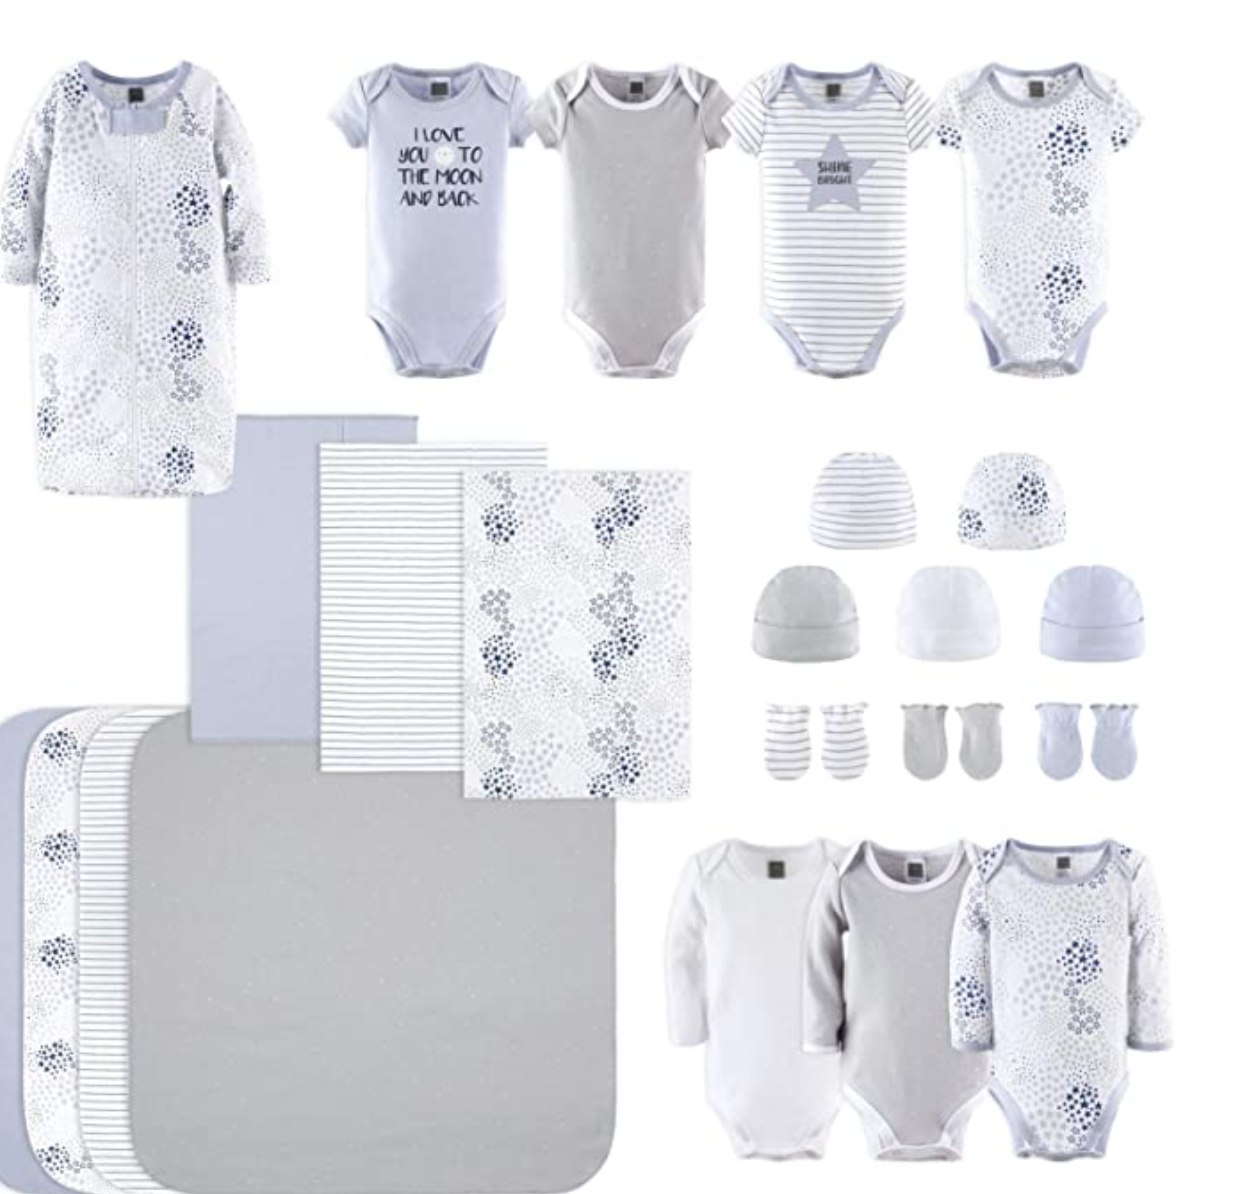 best-baby-gift-sets-clothes-and-accessory-set-for-newborns